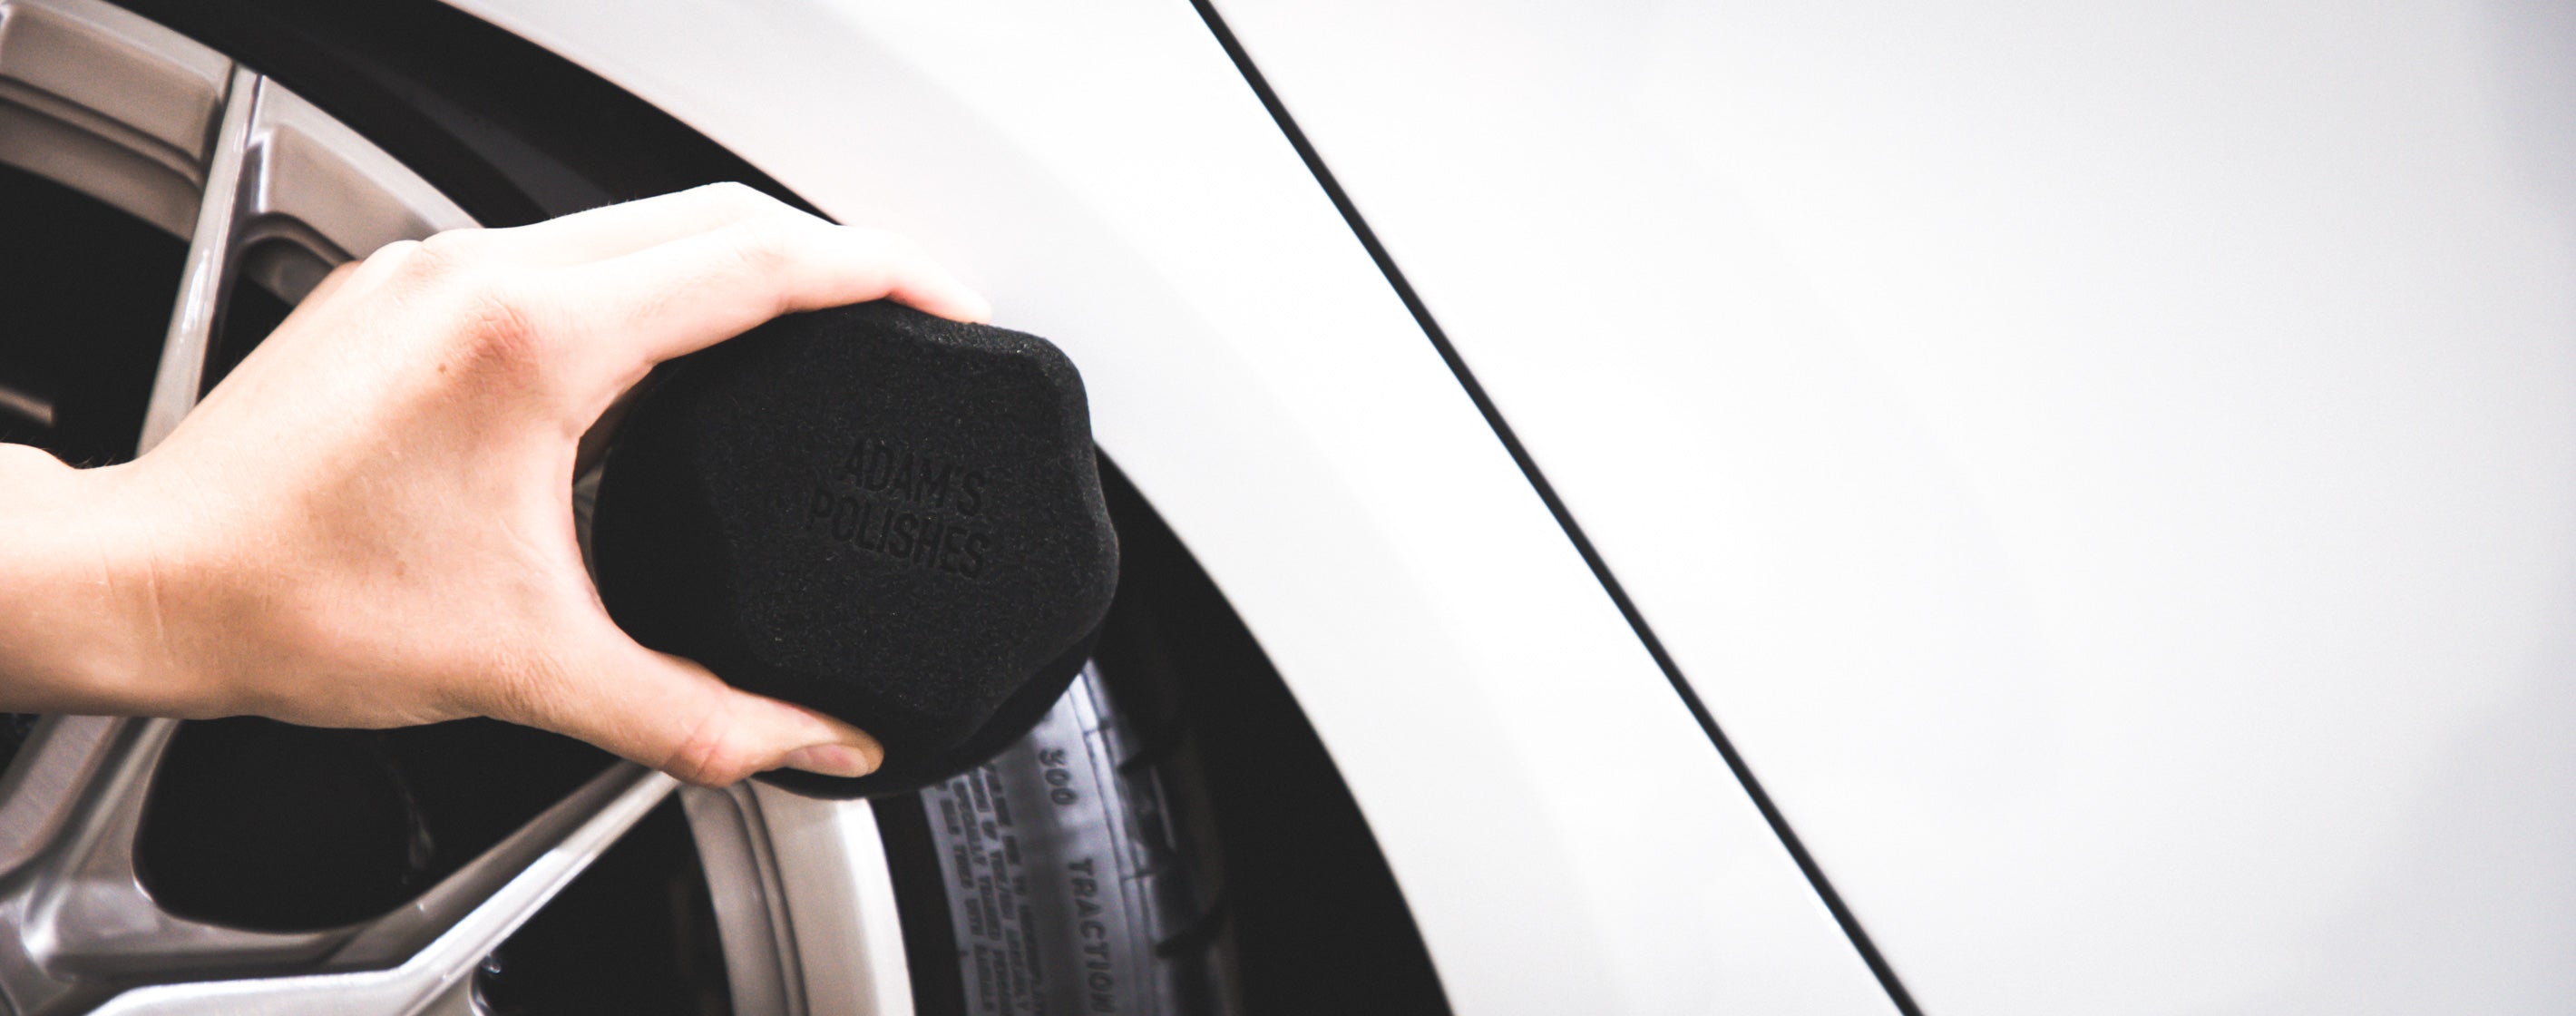 Tire Dressing Applicator Tire Shine Applicator Dressing Pad - Perfect for  Tire Detailing, Durable & Reusable Foam, Large Hex Grip Design for No Slip